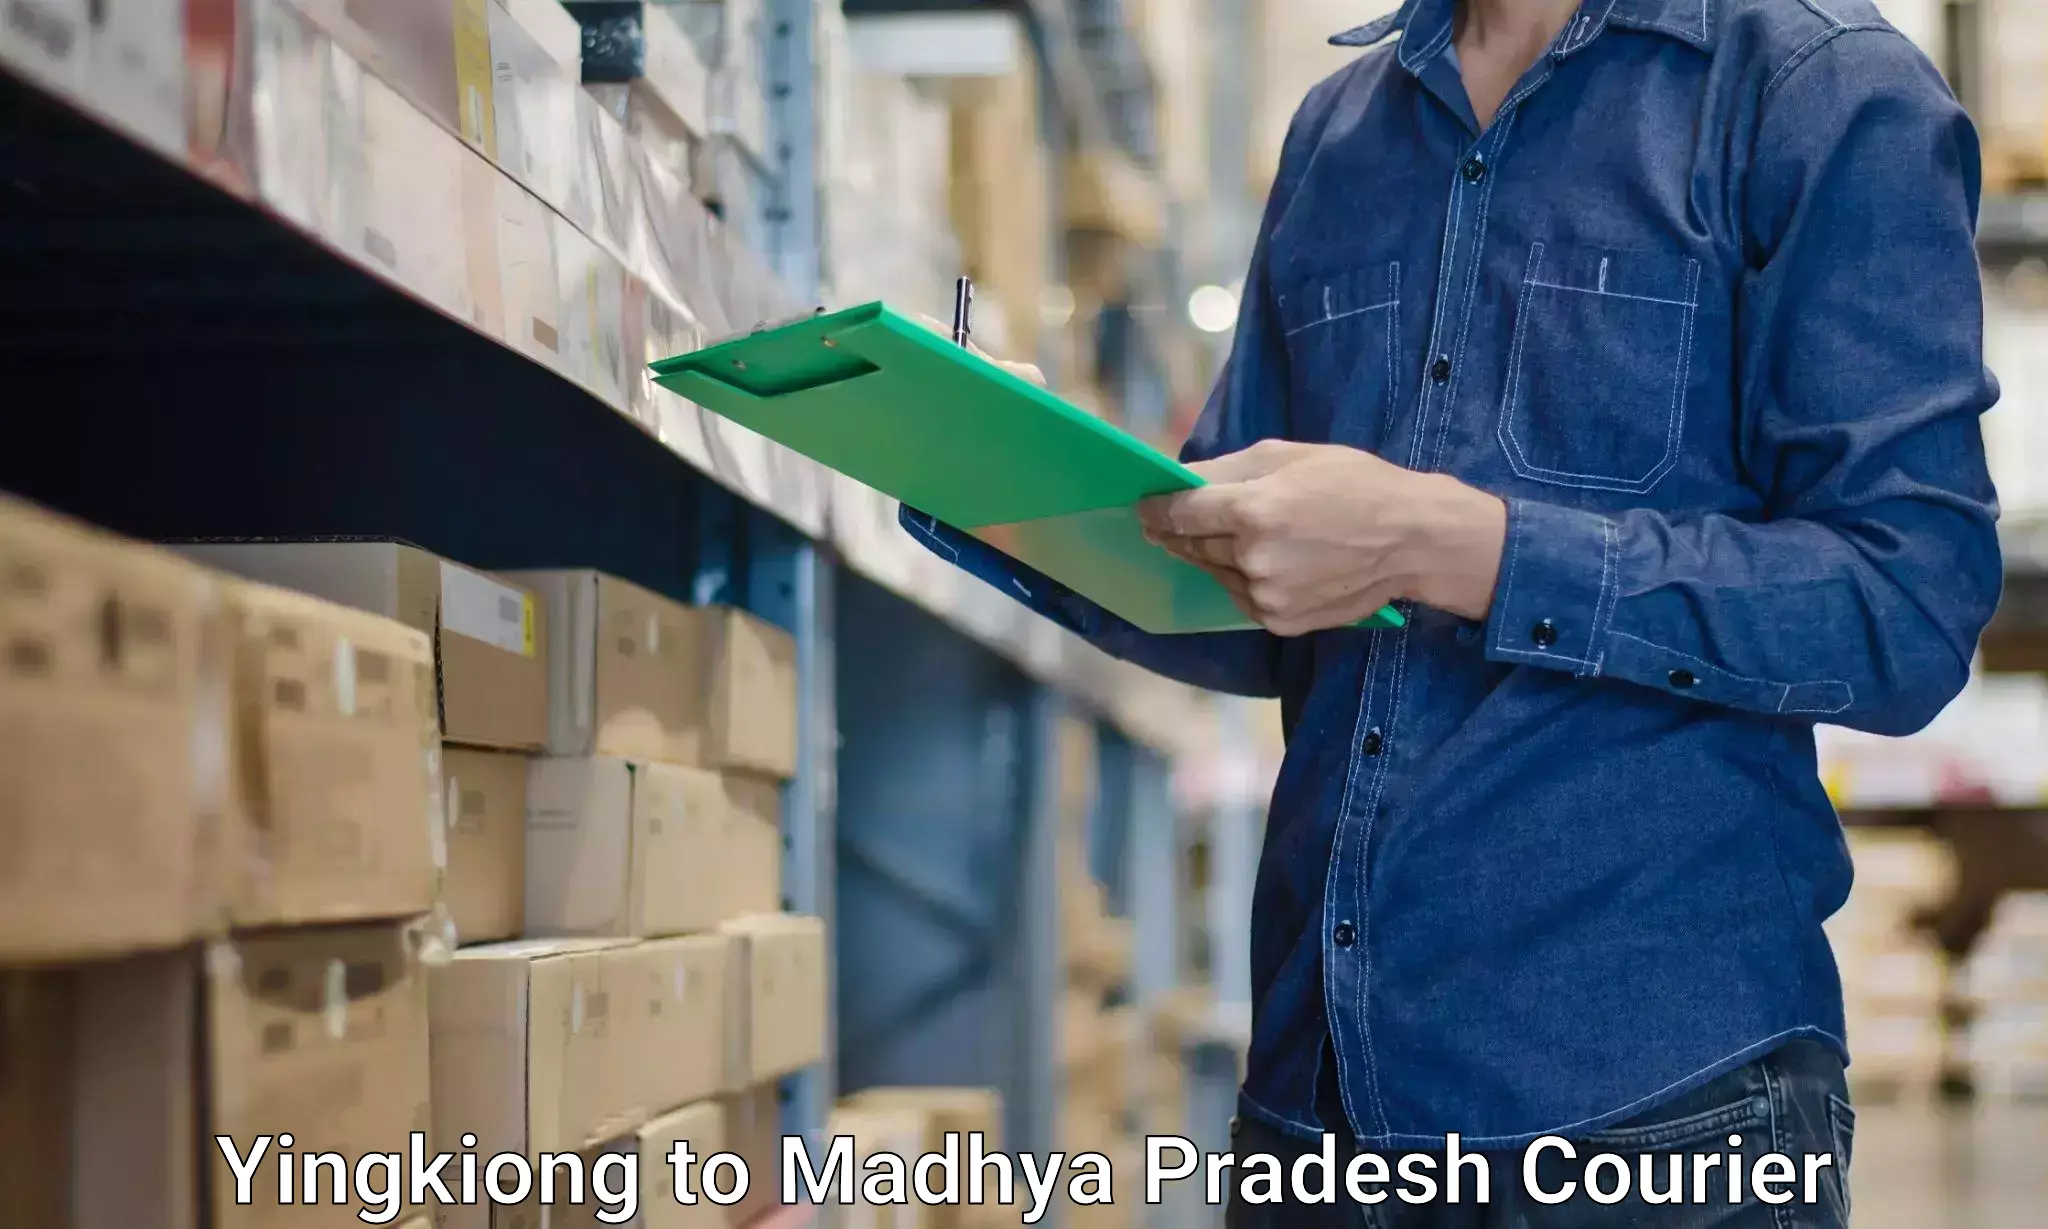 Home moving specialists Yingkiong to Madhya Pradesh